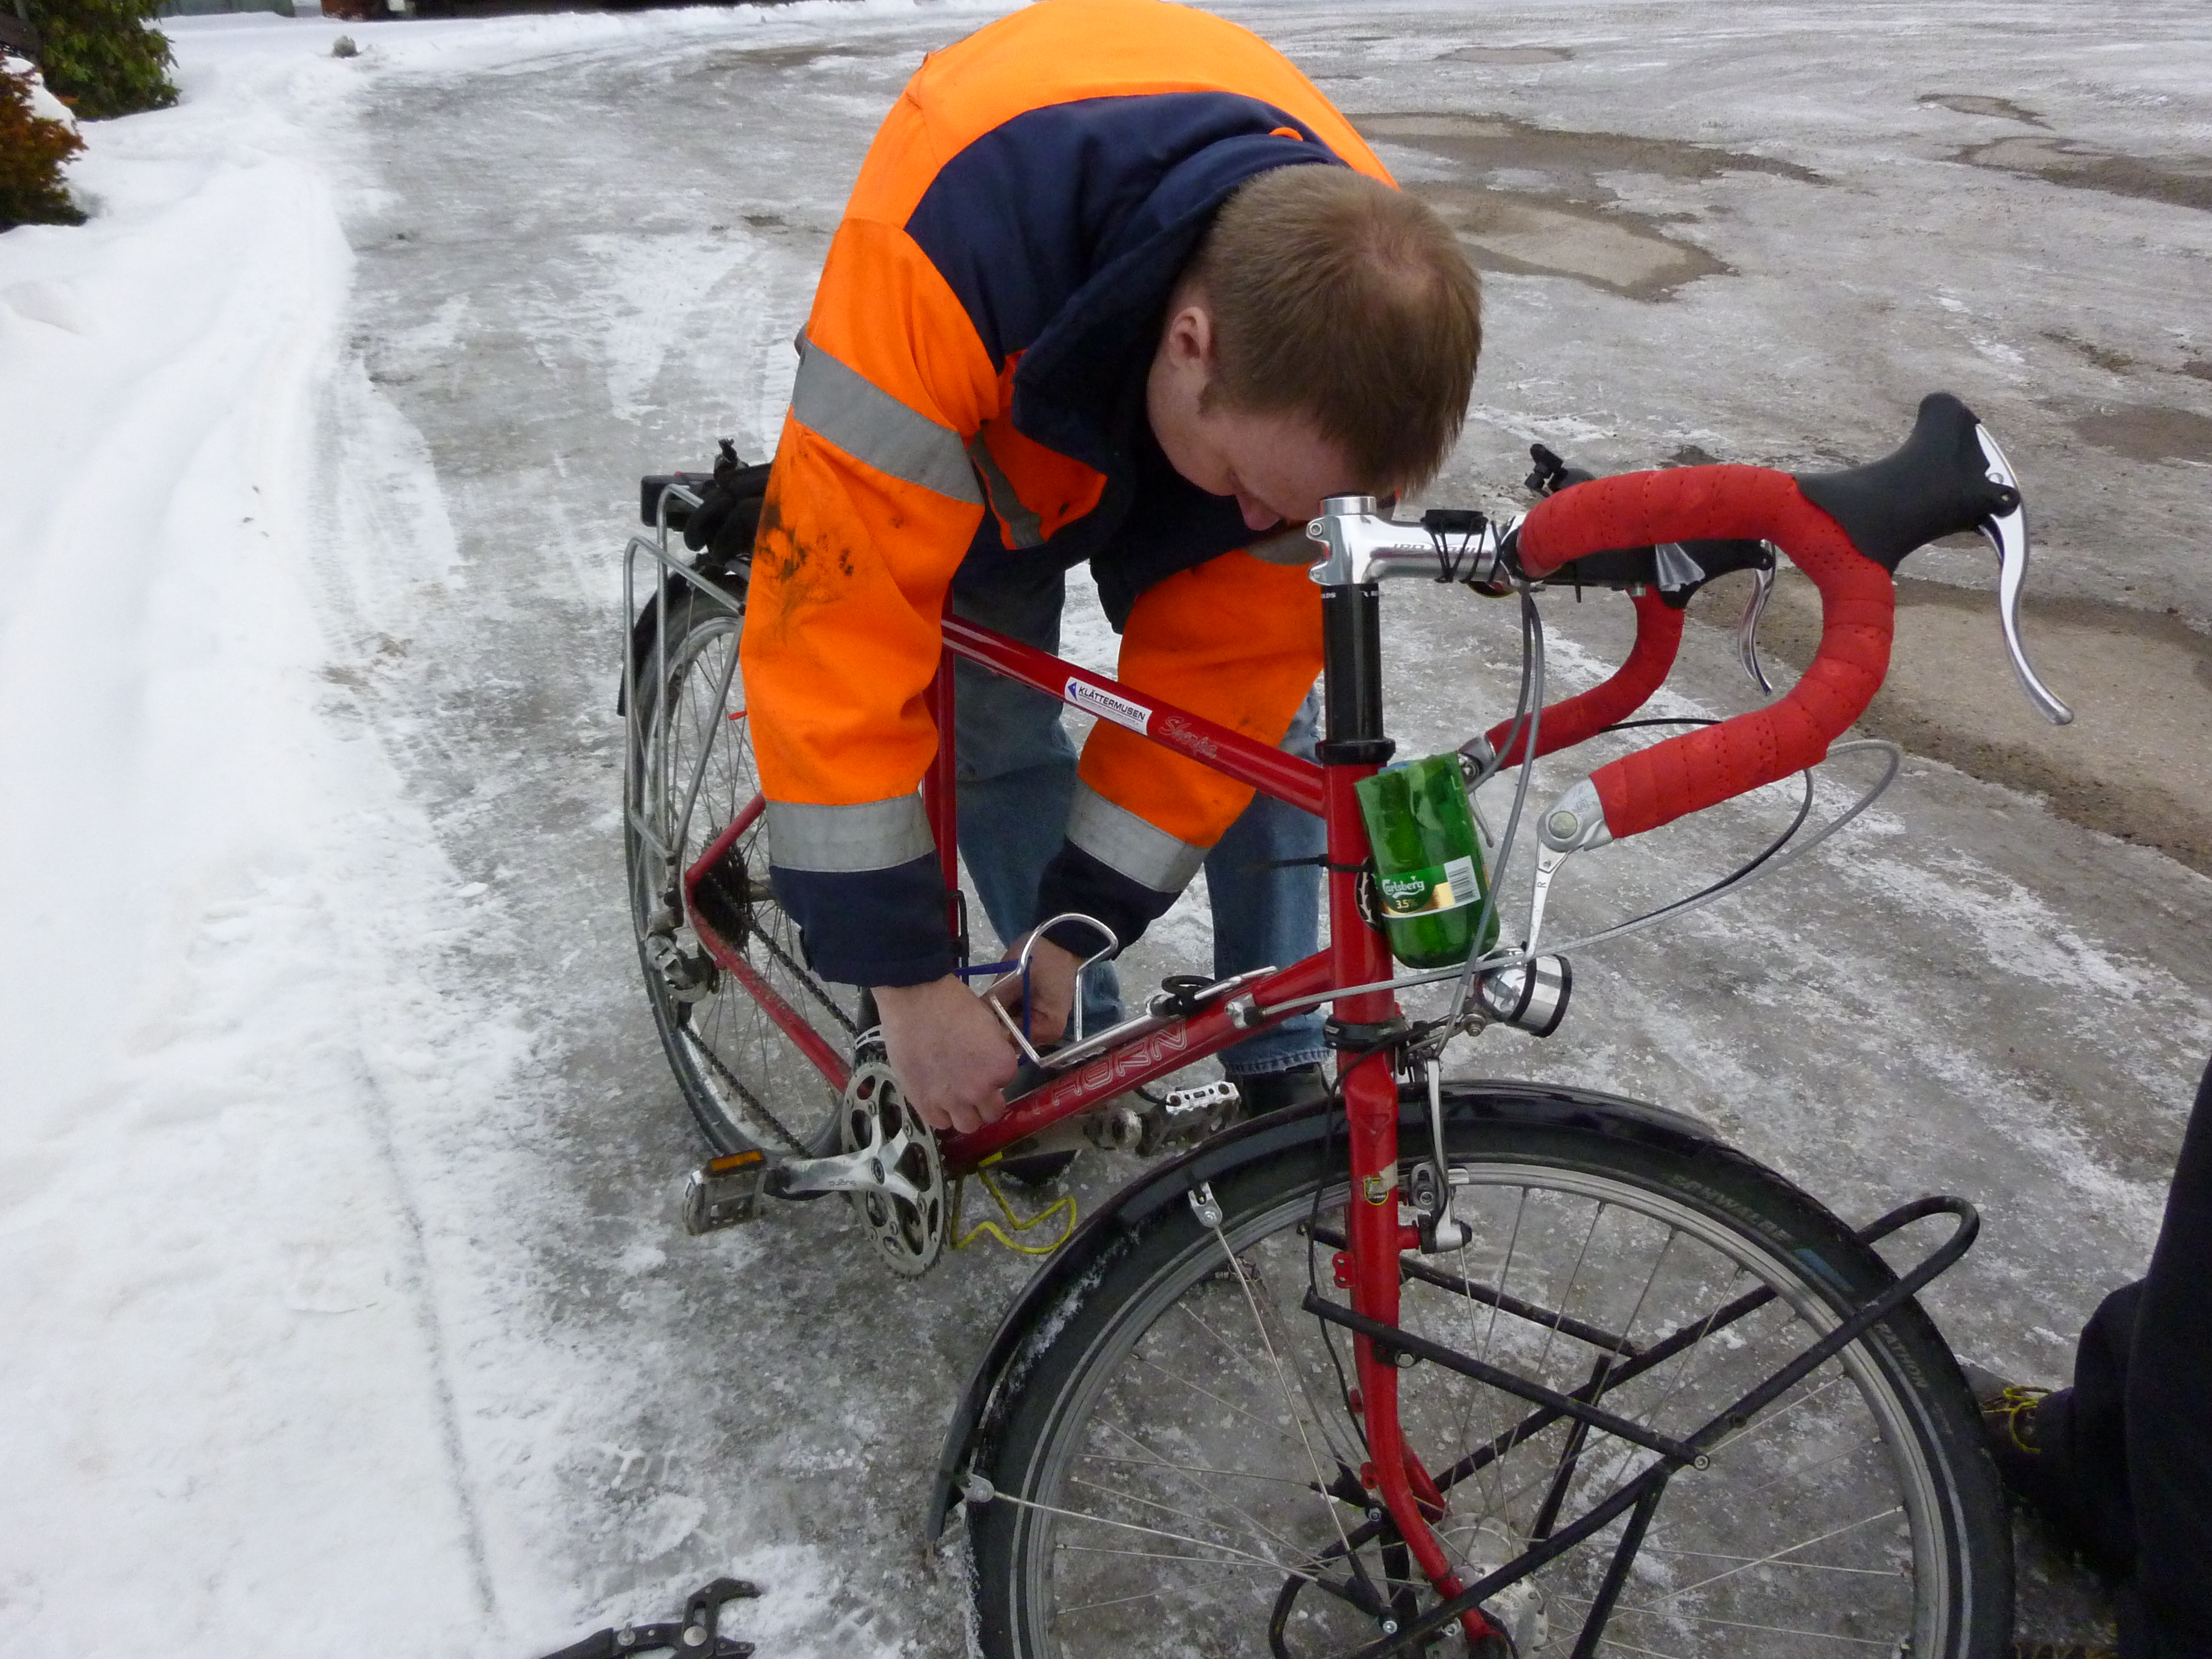 Peter trying to attach the front derailleur